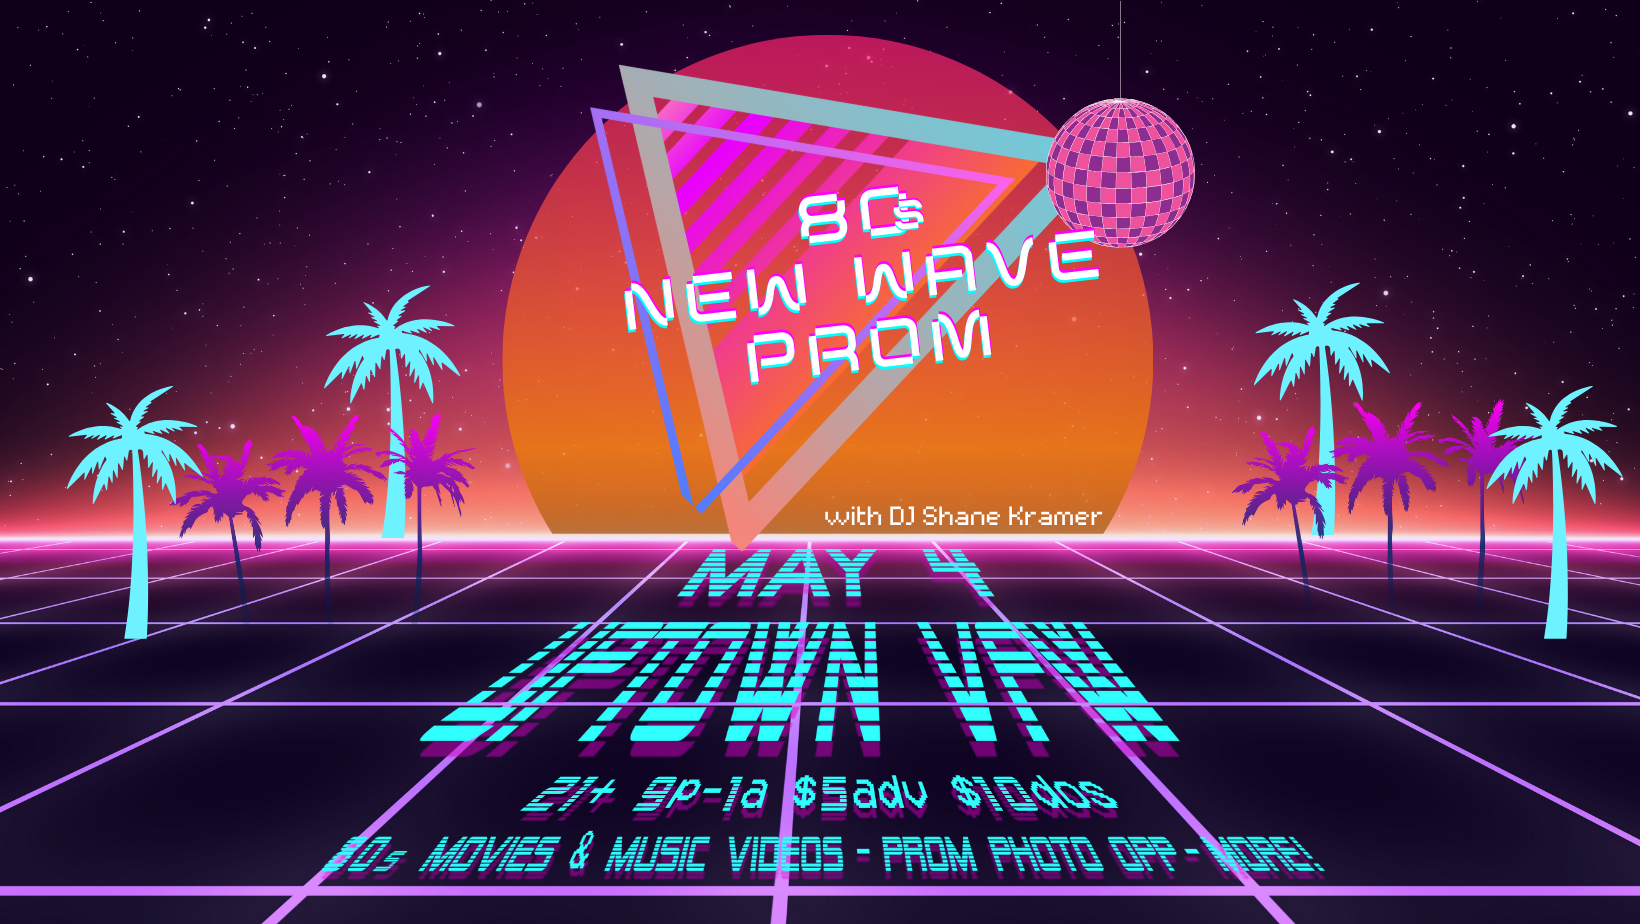 2nd Annual 80s New Wave Prom! Saturday, May 4 James Ballentine "Uptown" VFW Post 246 Doors 9:00pm :: Music 9:00pm :: 21+ GA $5 ADV / $10 DOS